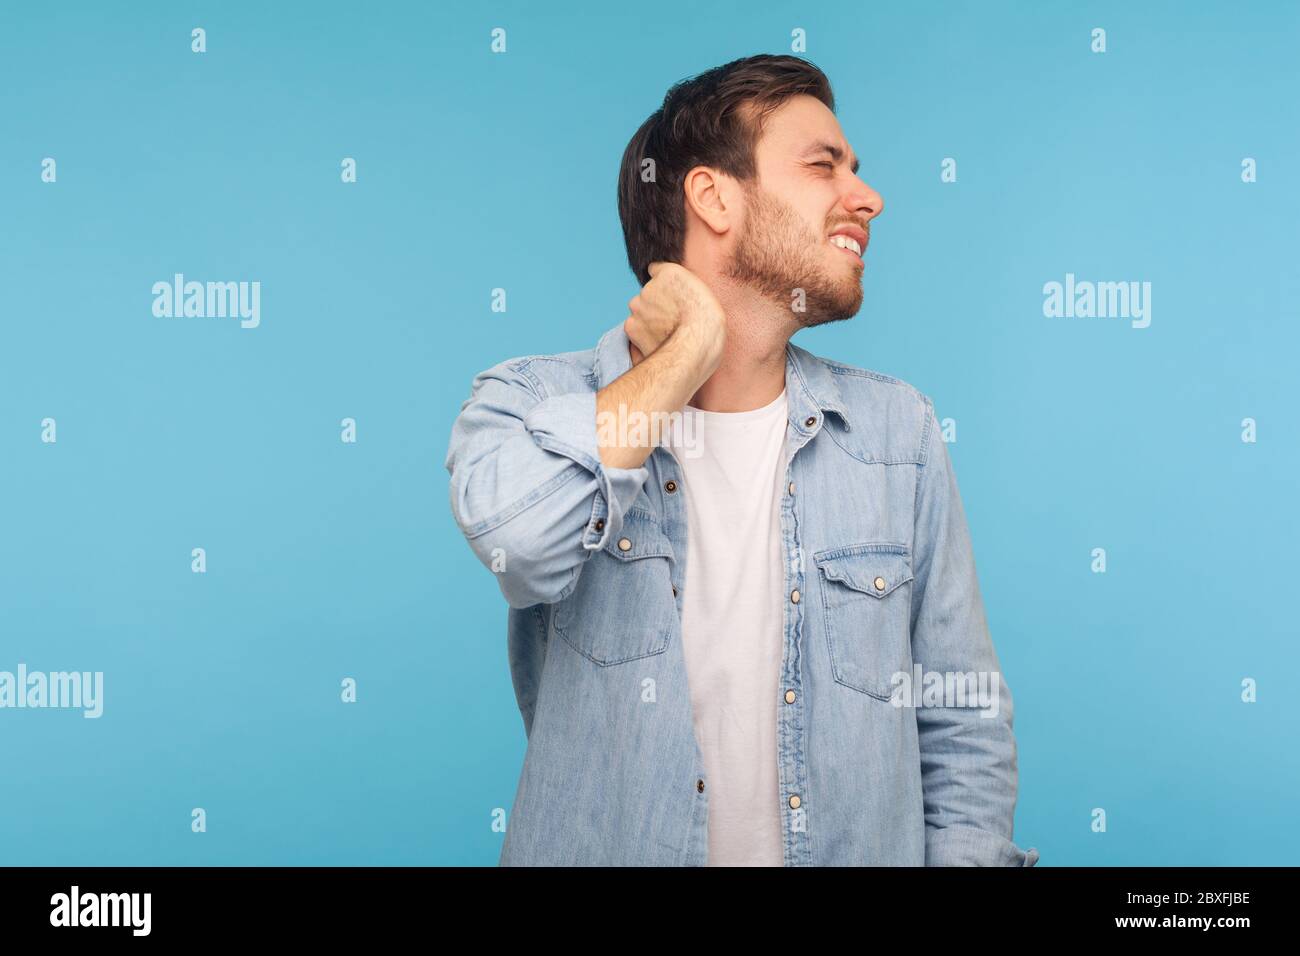 https://c8.alamy.com/comp/2BXFJBE/portrait-of-exhausted-young-man-in-denim-shirt-touching-neck-and-grimacing-from-intense-pain-massaging-to-relieve-muscle-tension-hurting-shoulders-2BXFJBE.jpg